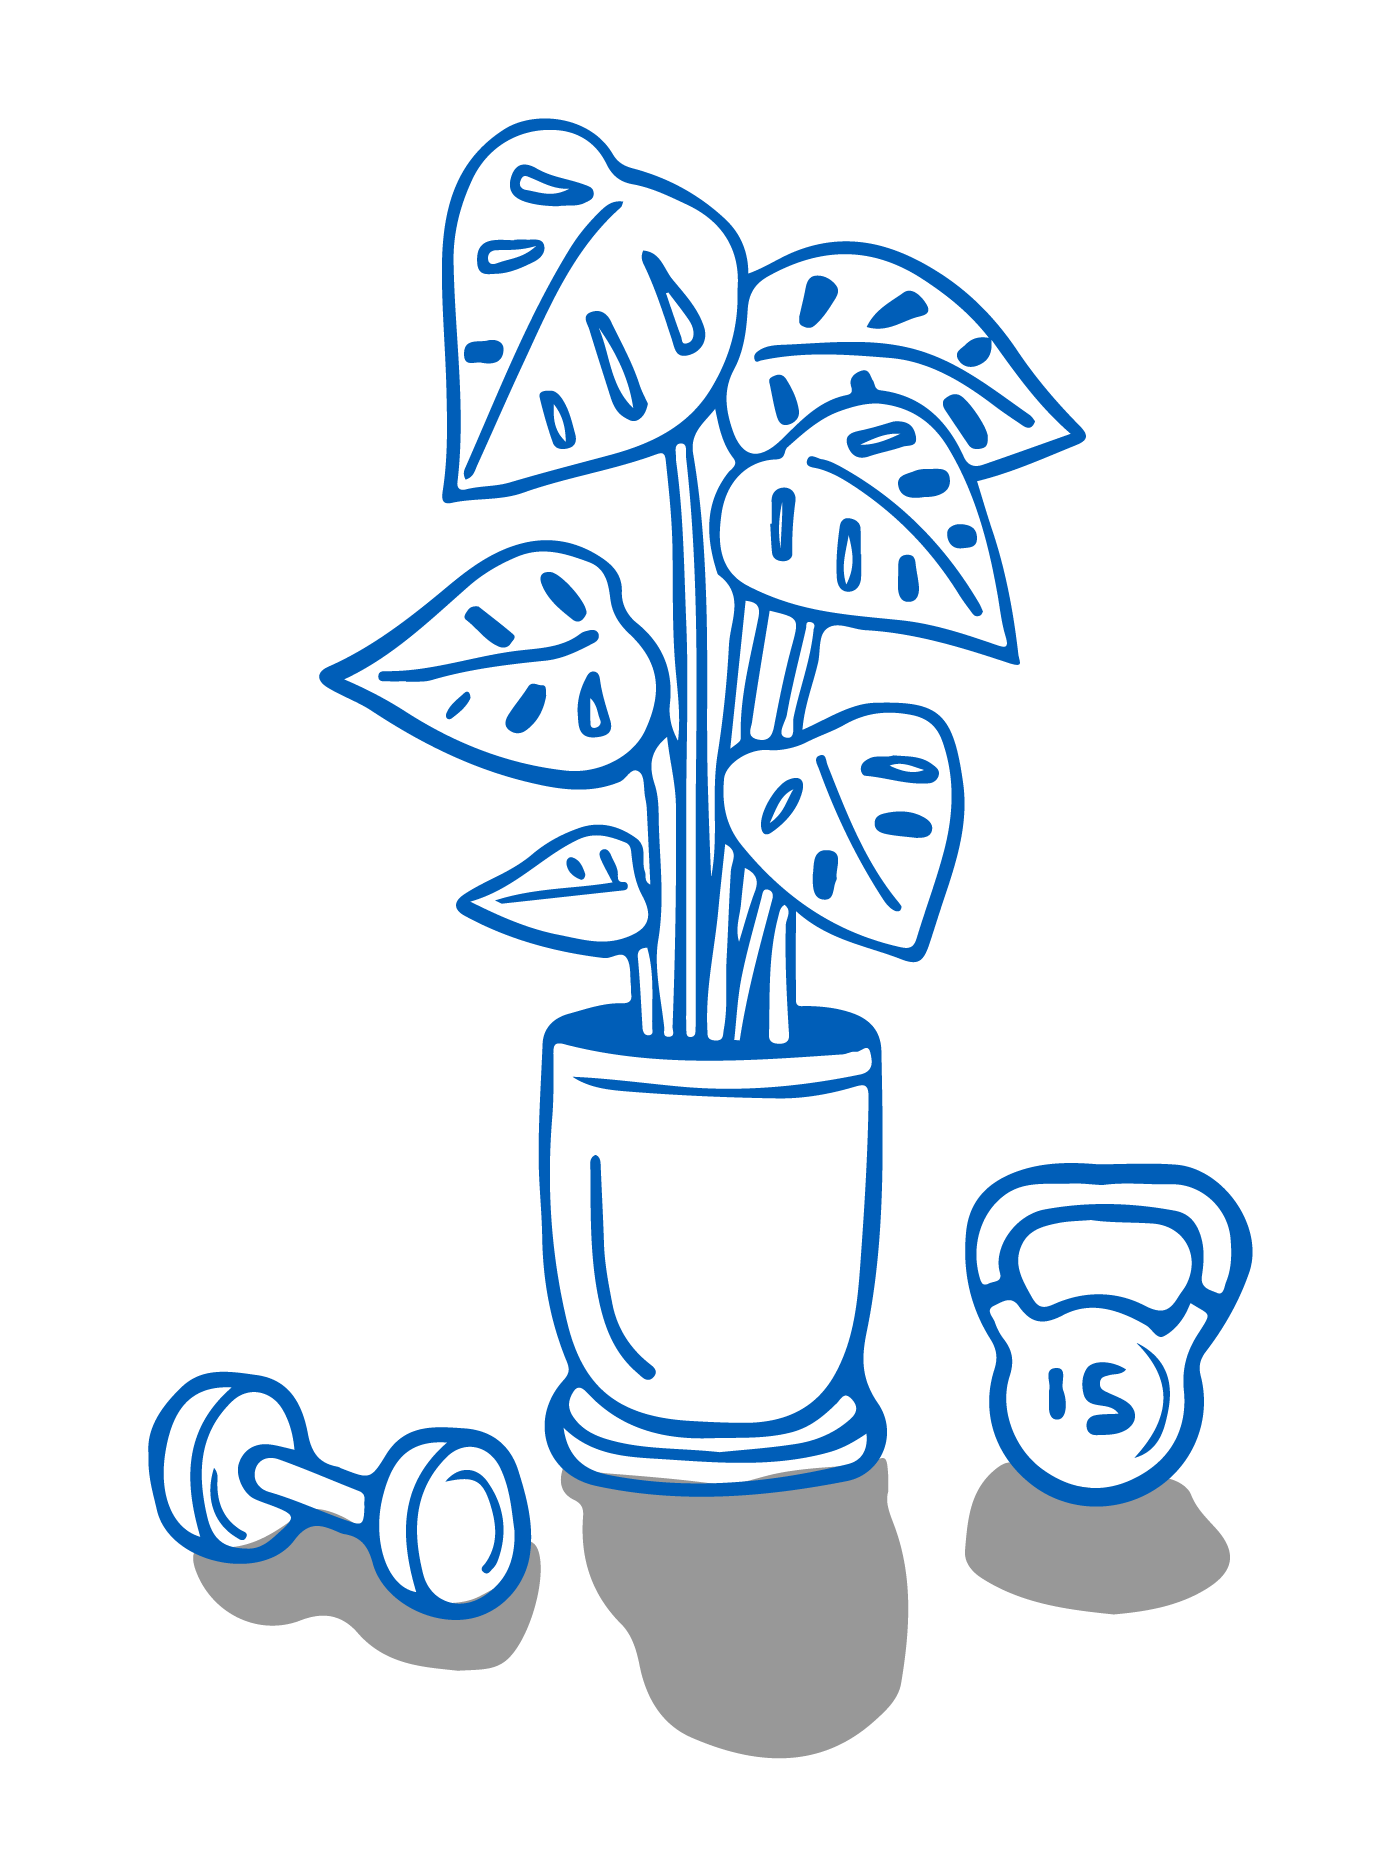 A houseplant sits on the floor between a single dumbbell and a kettlebell.